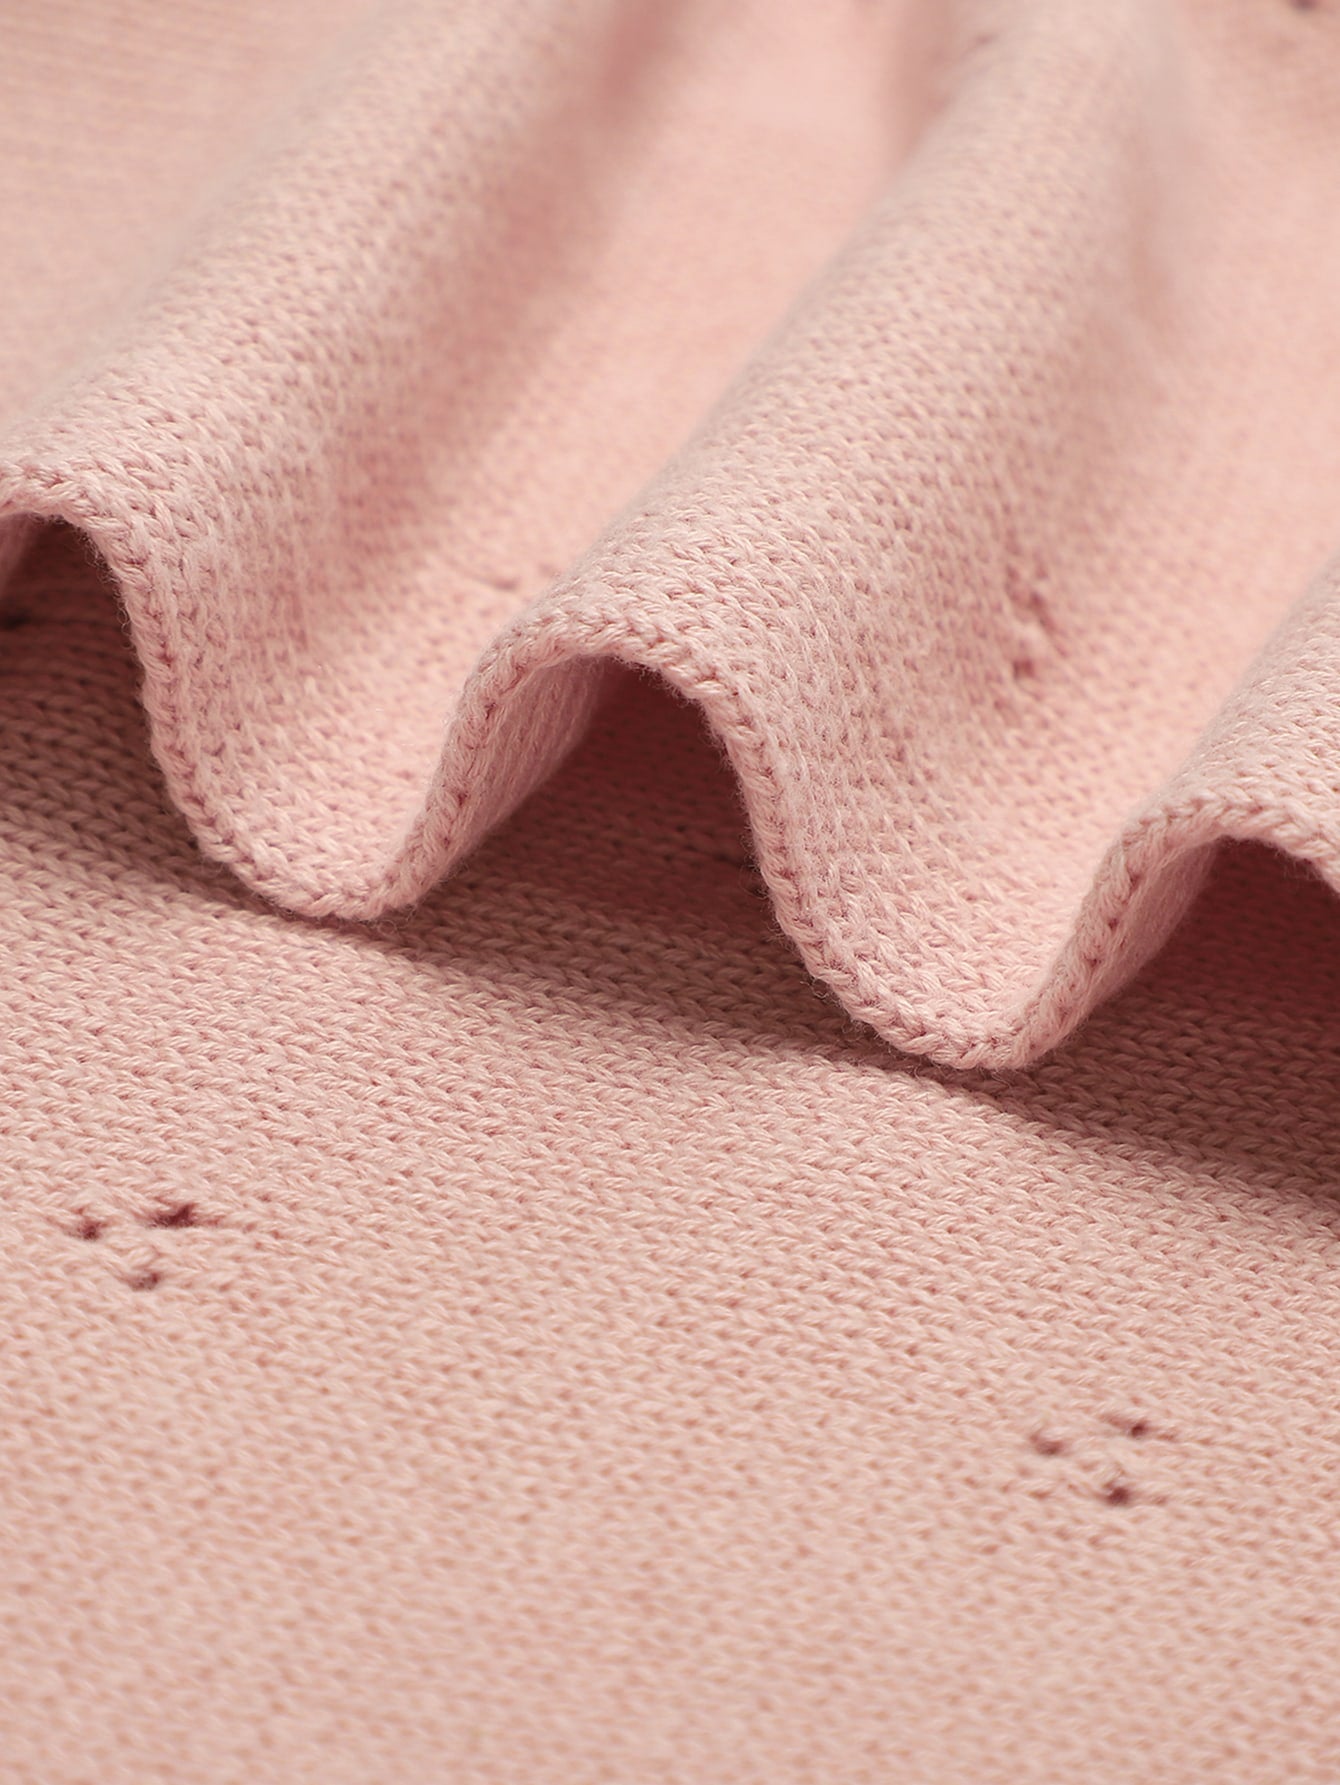 1pc Simple Pink Multi-functional Knitted Baby Blanket For All Seasons